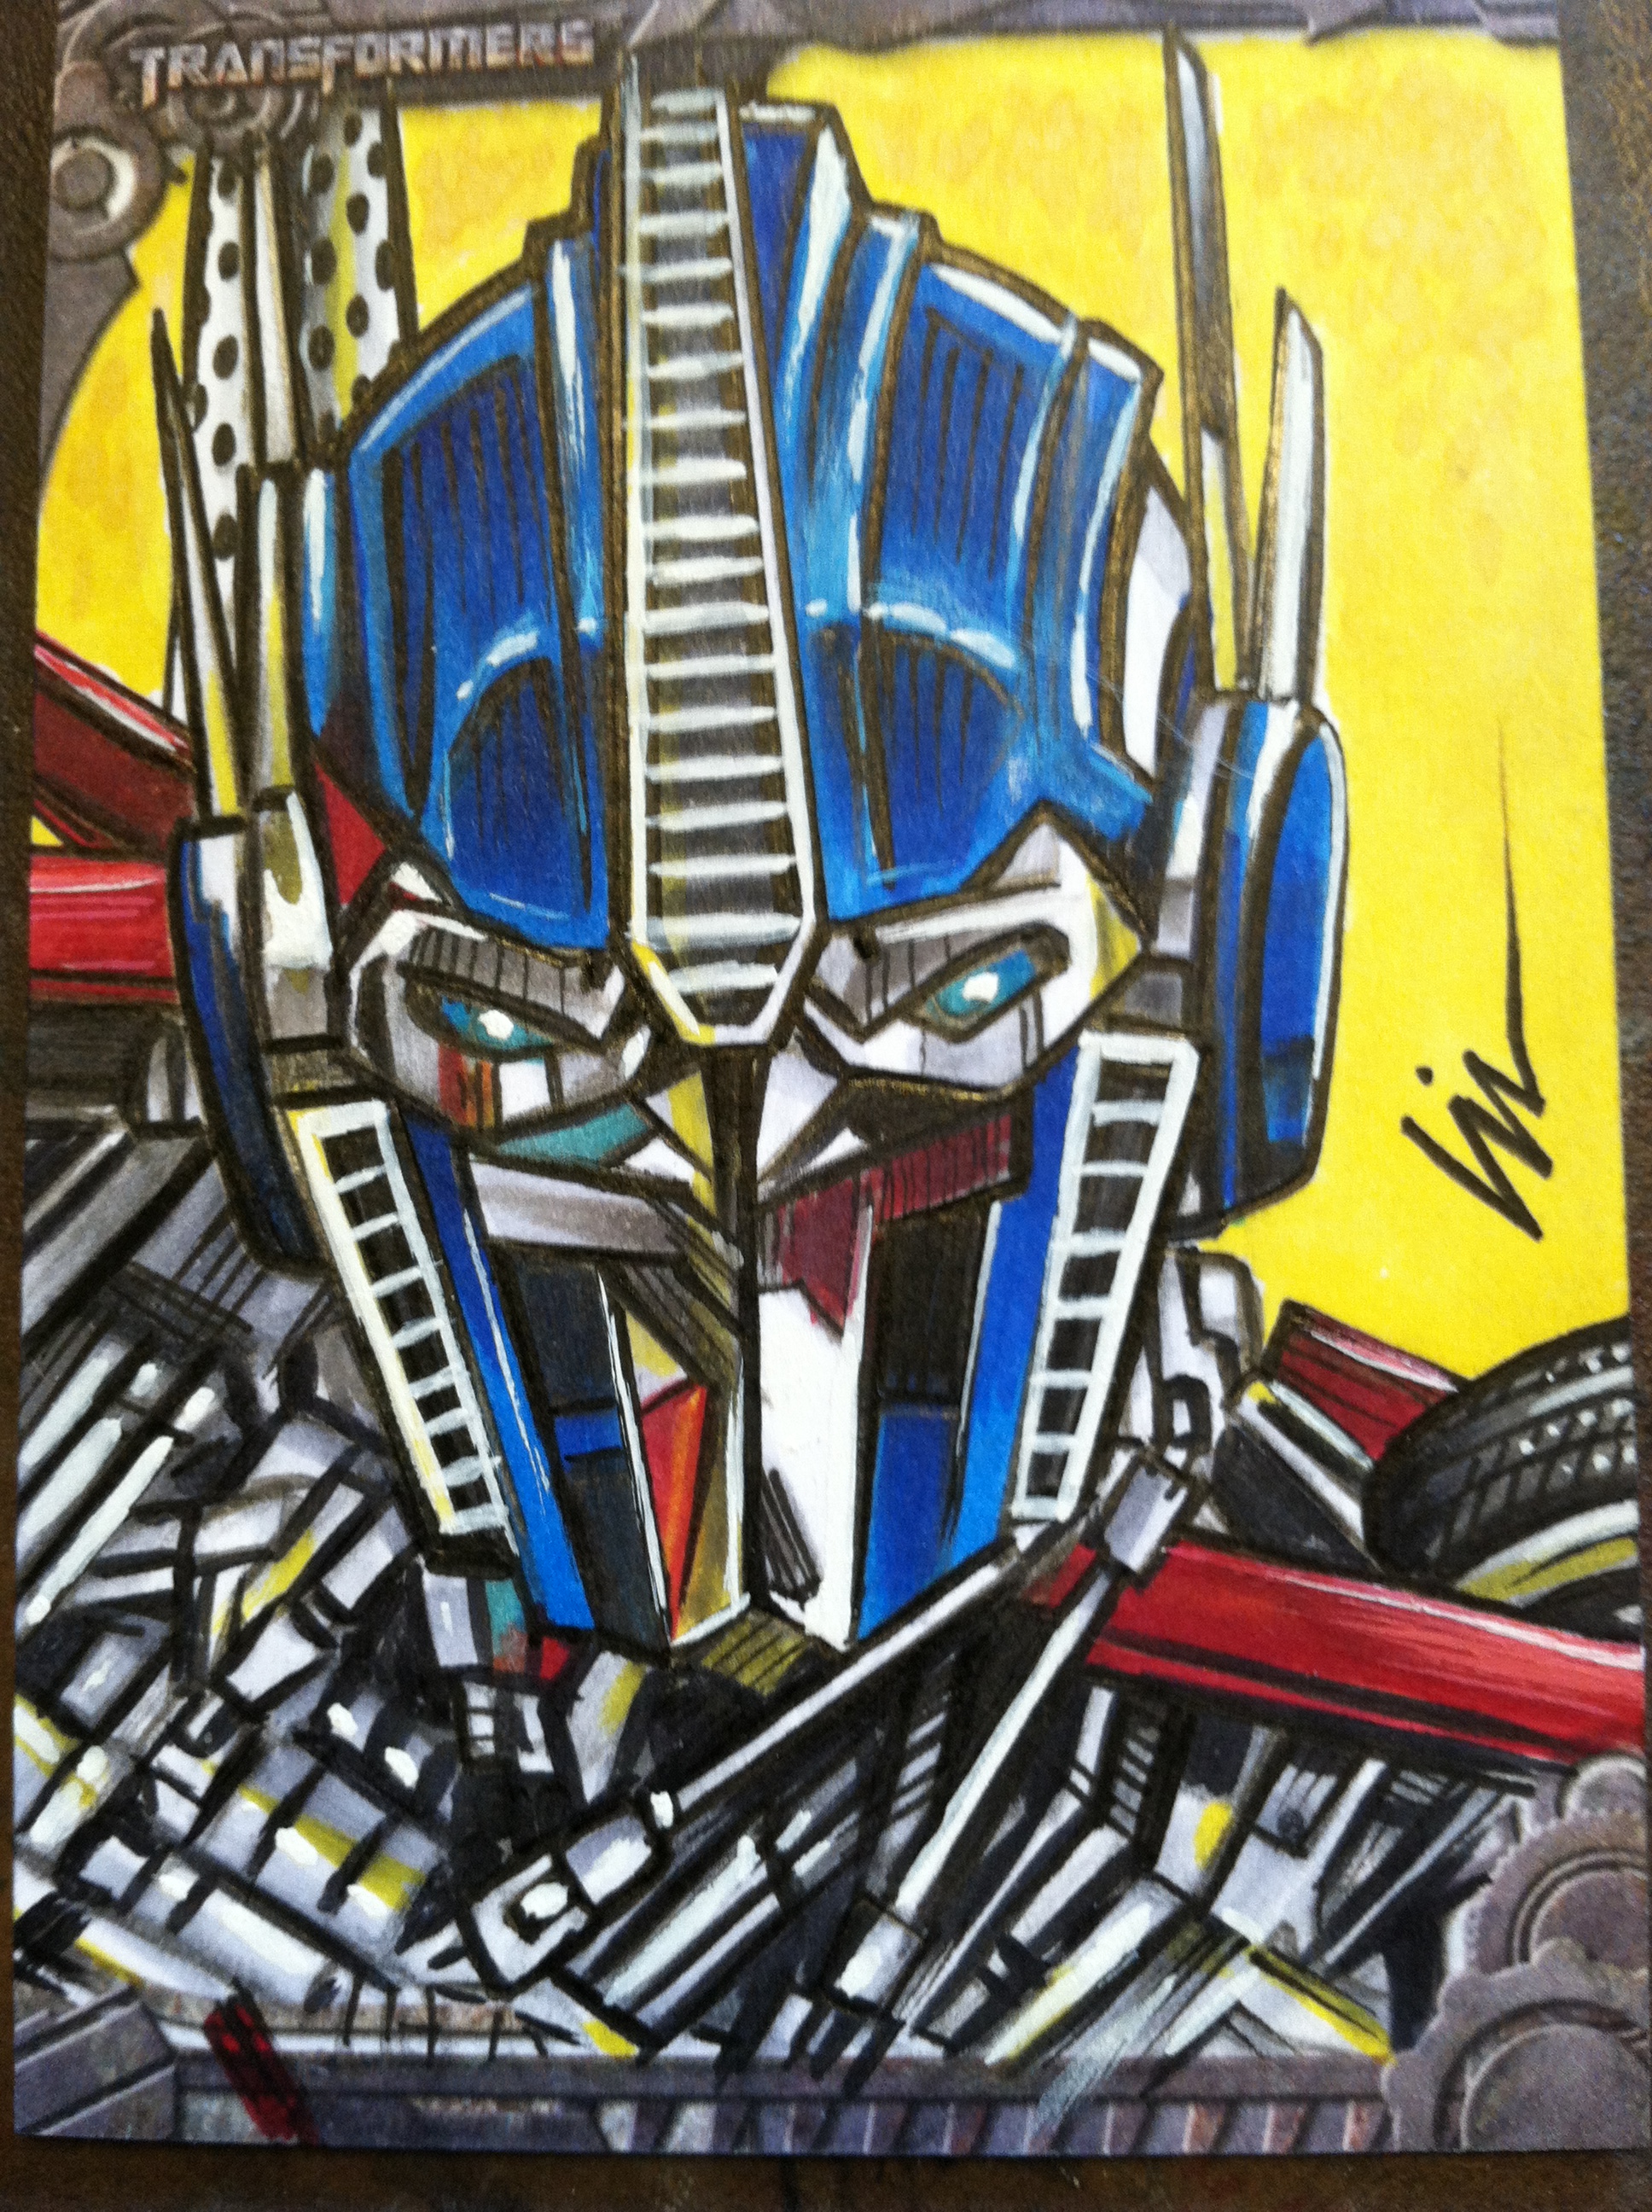 Transformers: Sketchcards in disguise! New cards for Breygent to share.